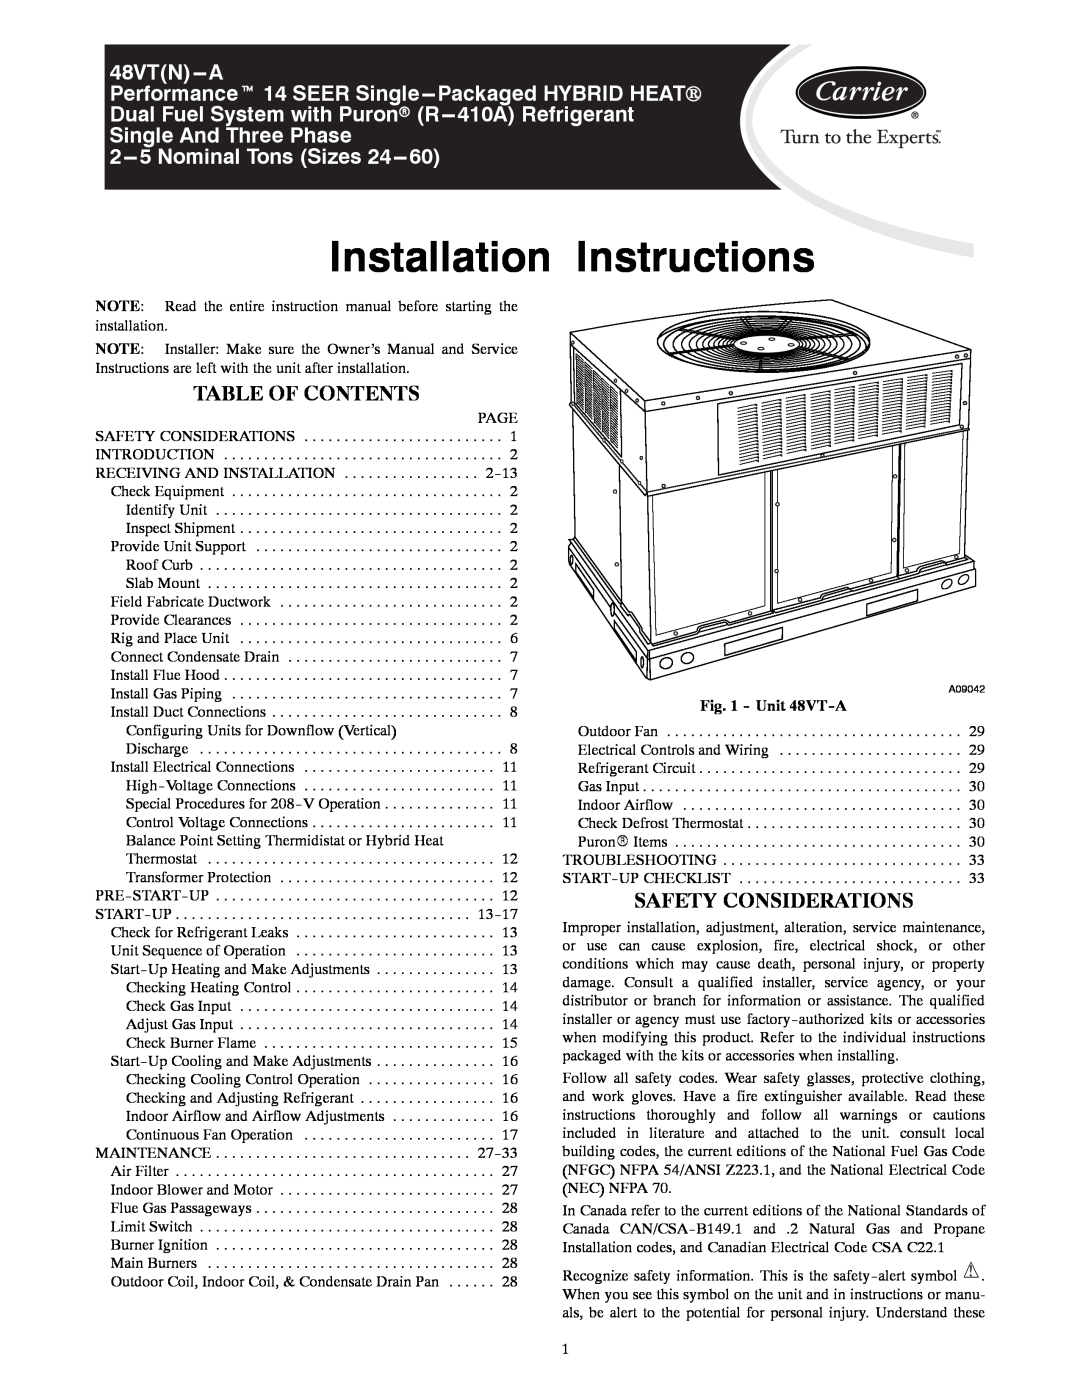 Carrier 48VT(N) installation instructions Table Of Contents, Safety Considerations, Unit 48VT-A, Installation Instructions 